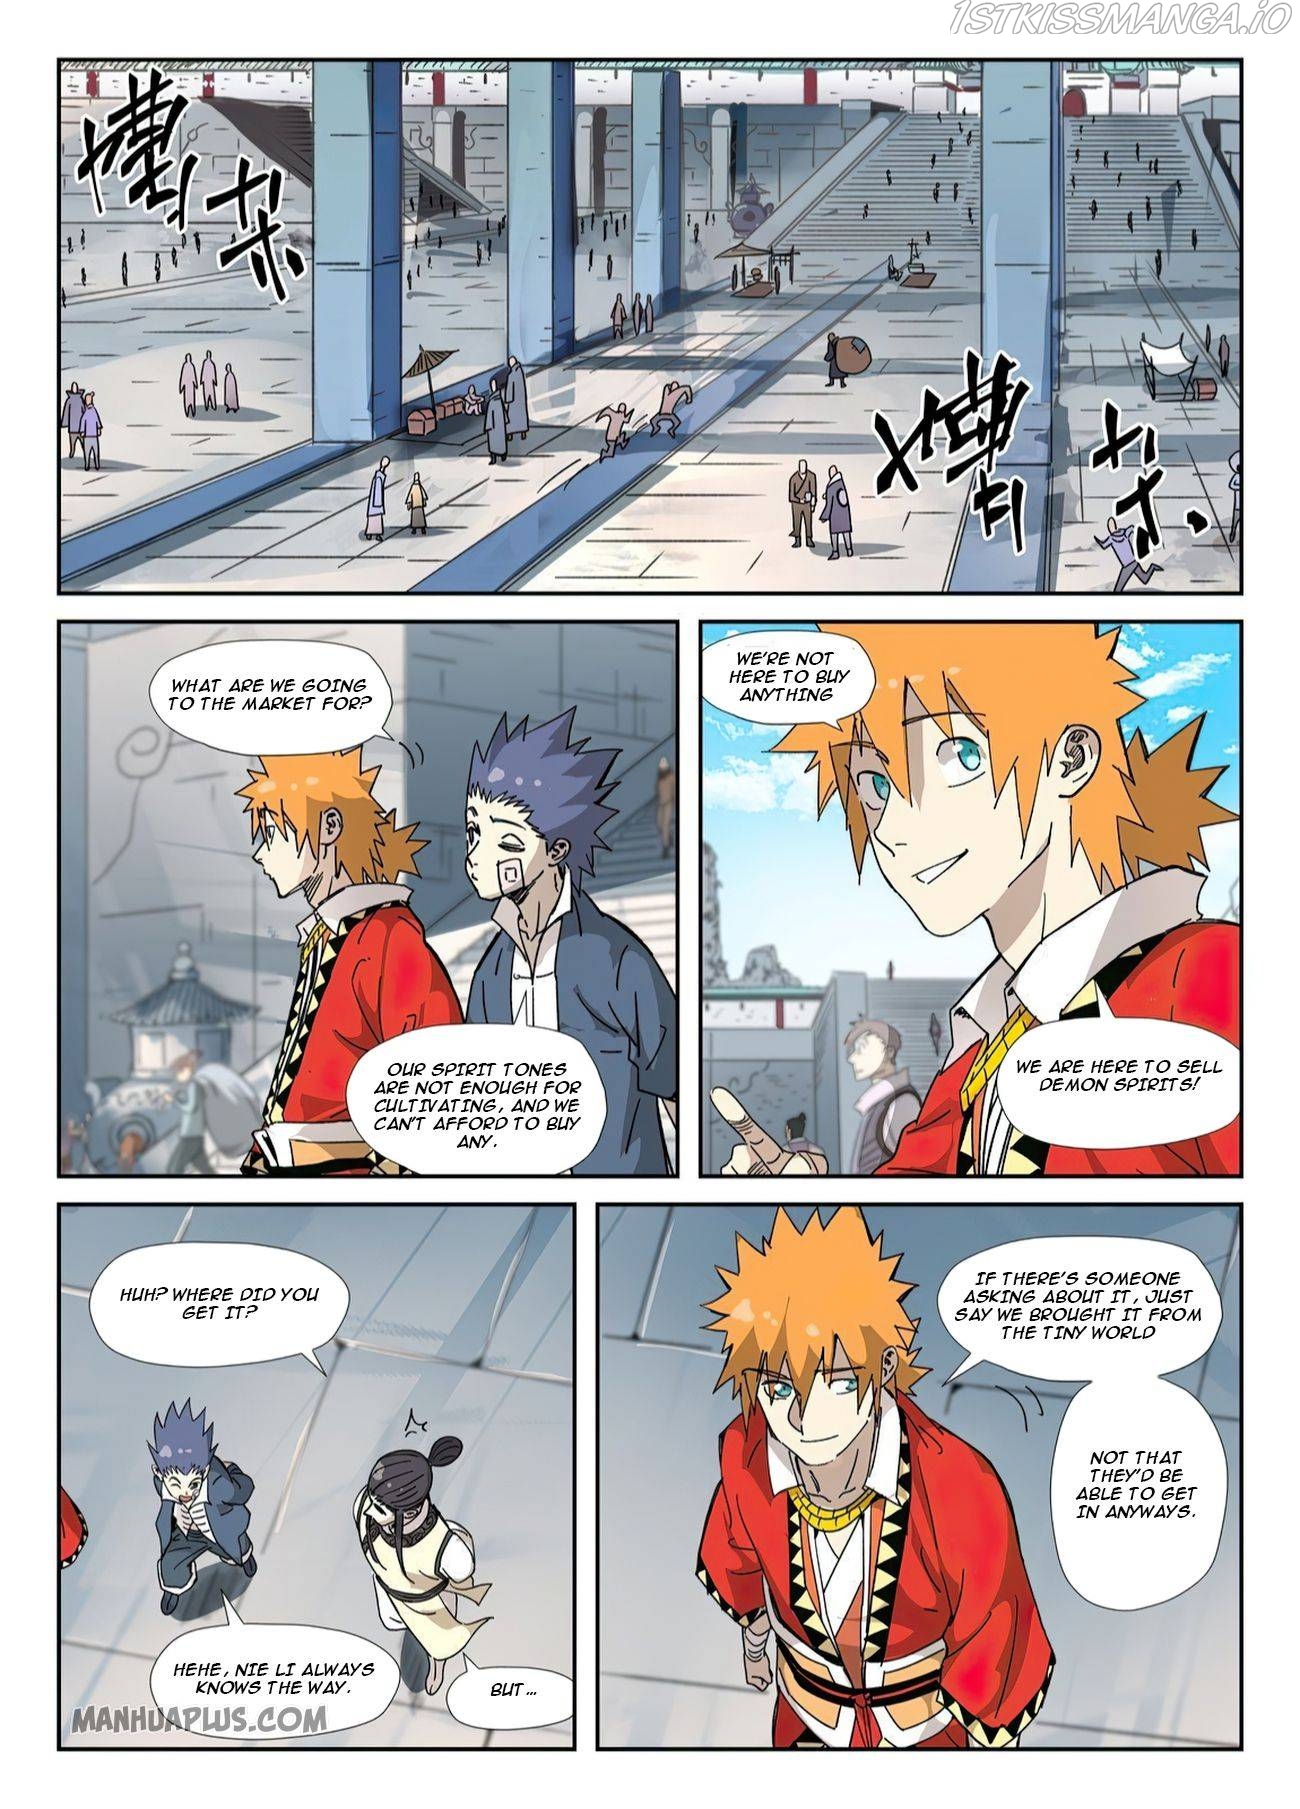 Tales of Demons and Gods Manhua Chapter 327.5 - Page 1